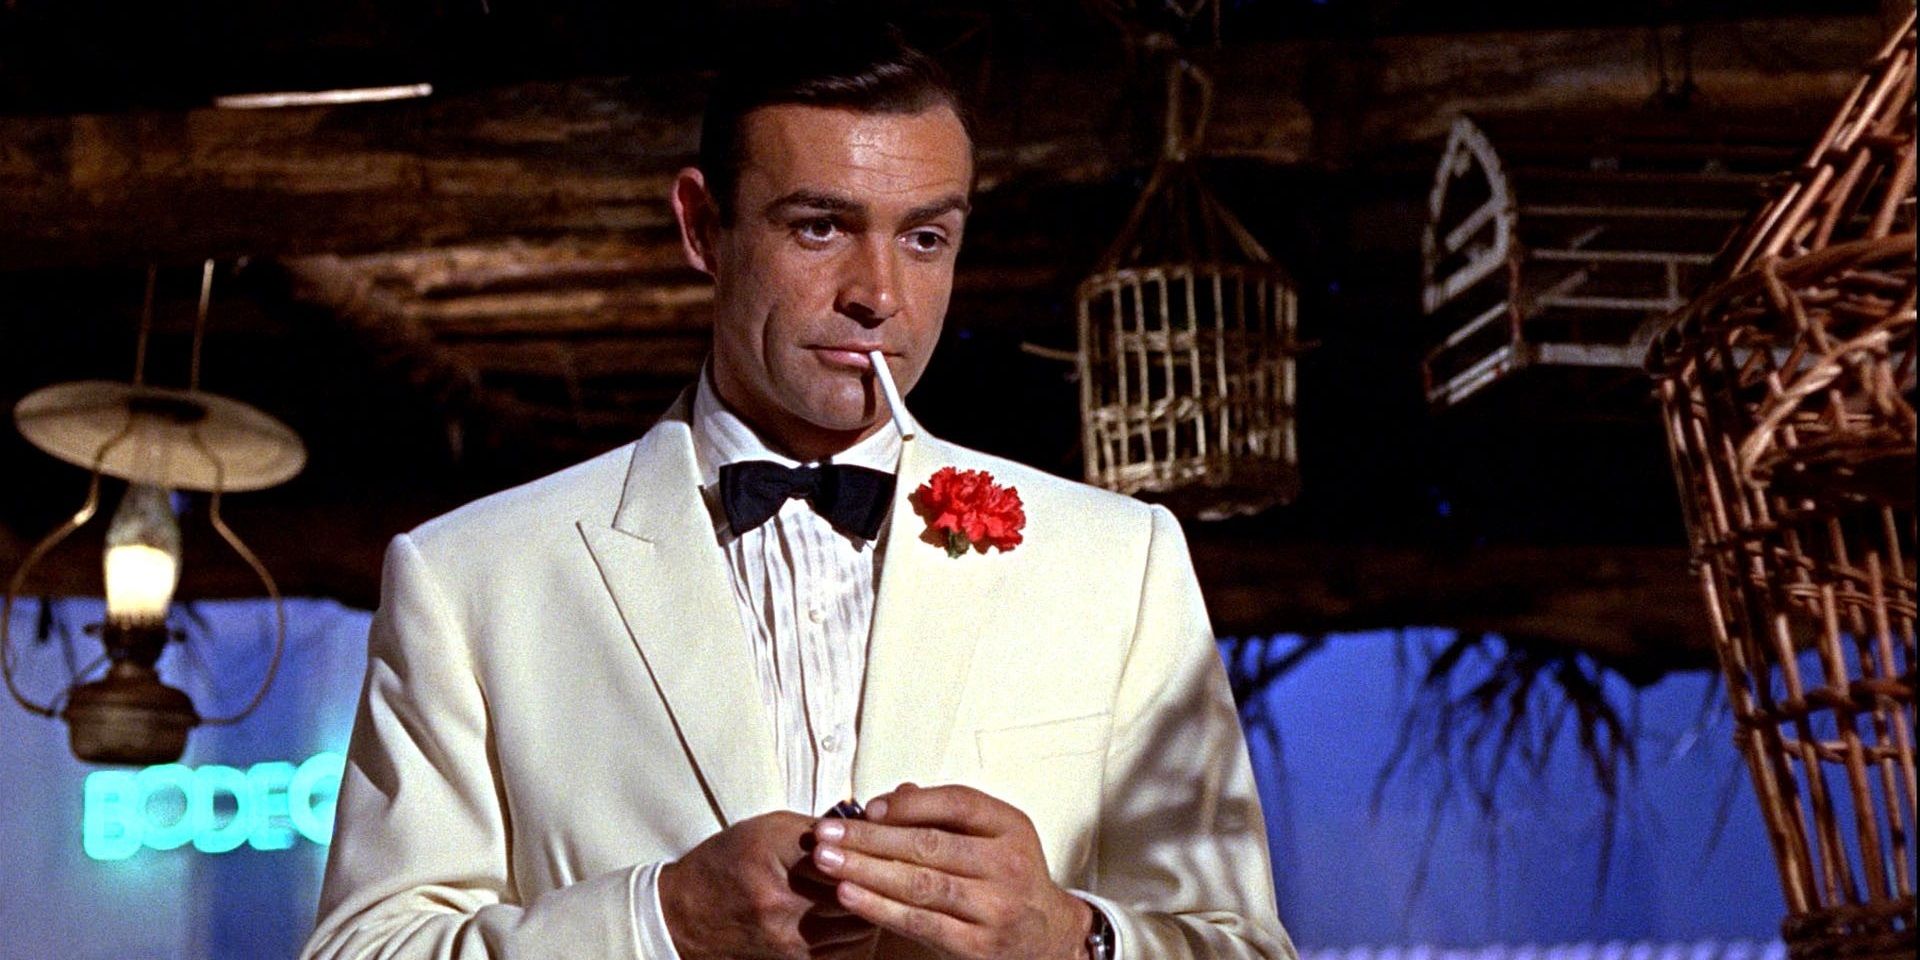 James Bond 5 Ways The 007 Franchise Is Great (& Its 5 Biggest Problems)